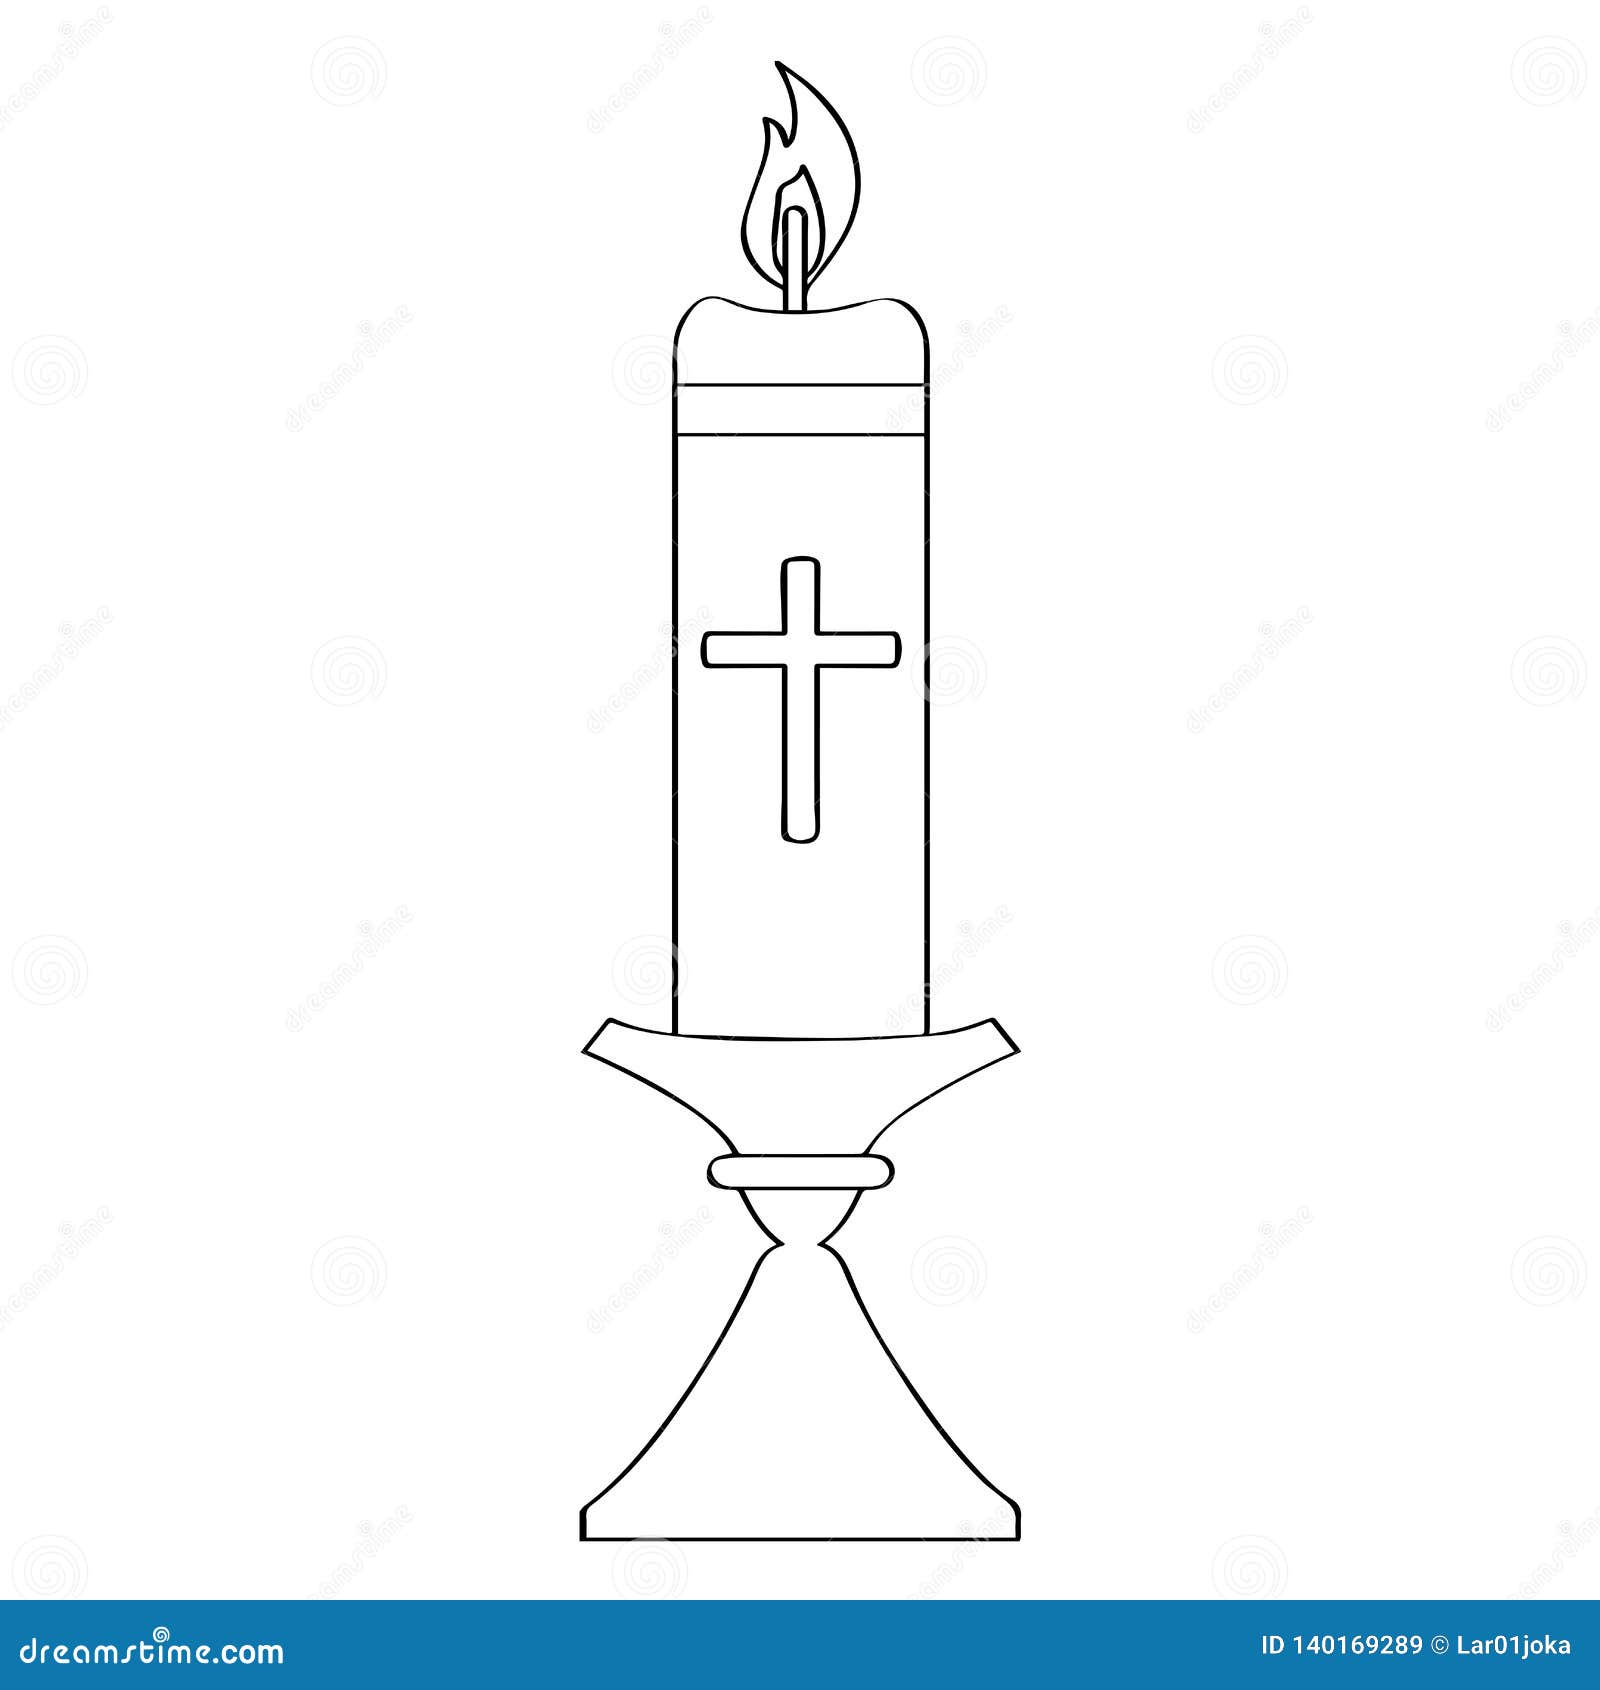 Outline of a Paschal Candle Stock Vector Illustration of candlestick